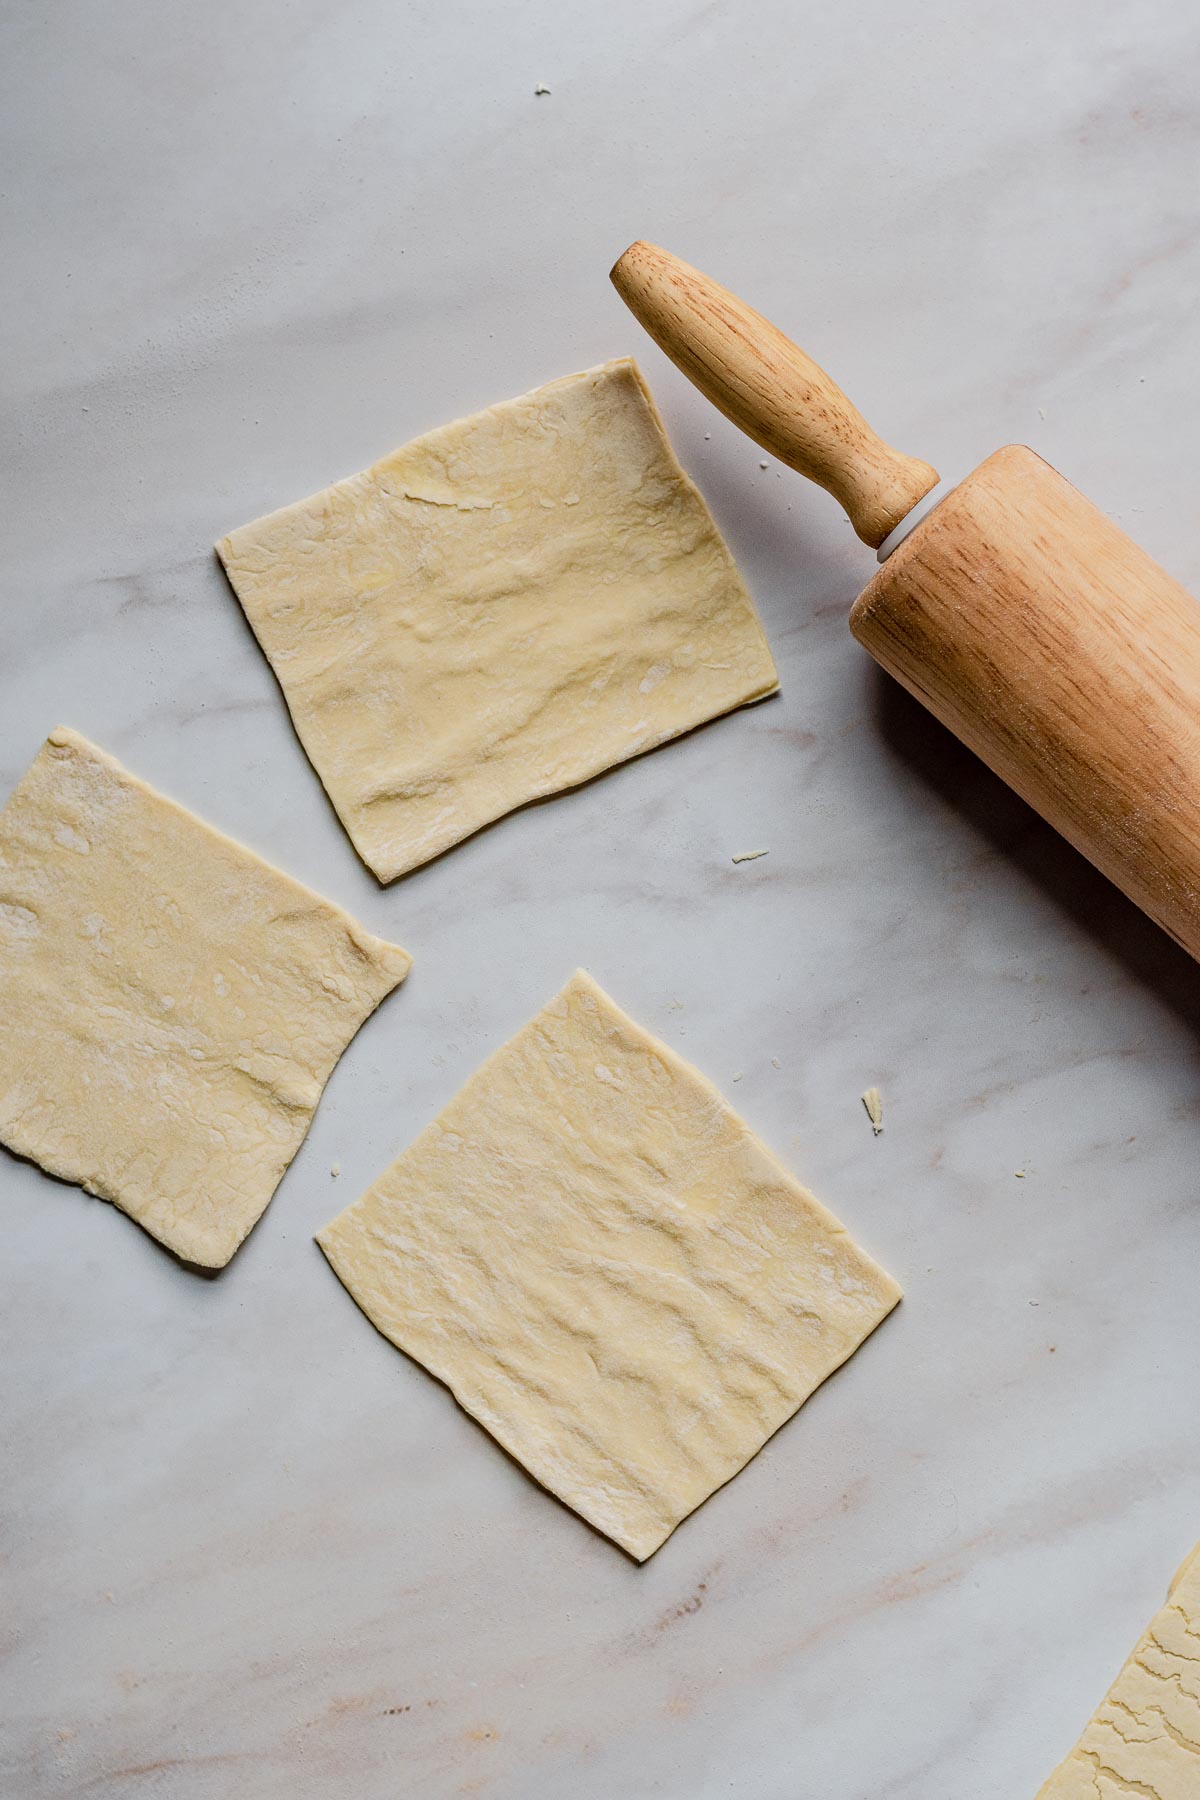 Squares of puff pastry and a rolling pin.